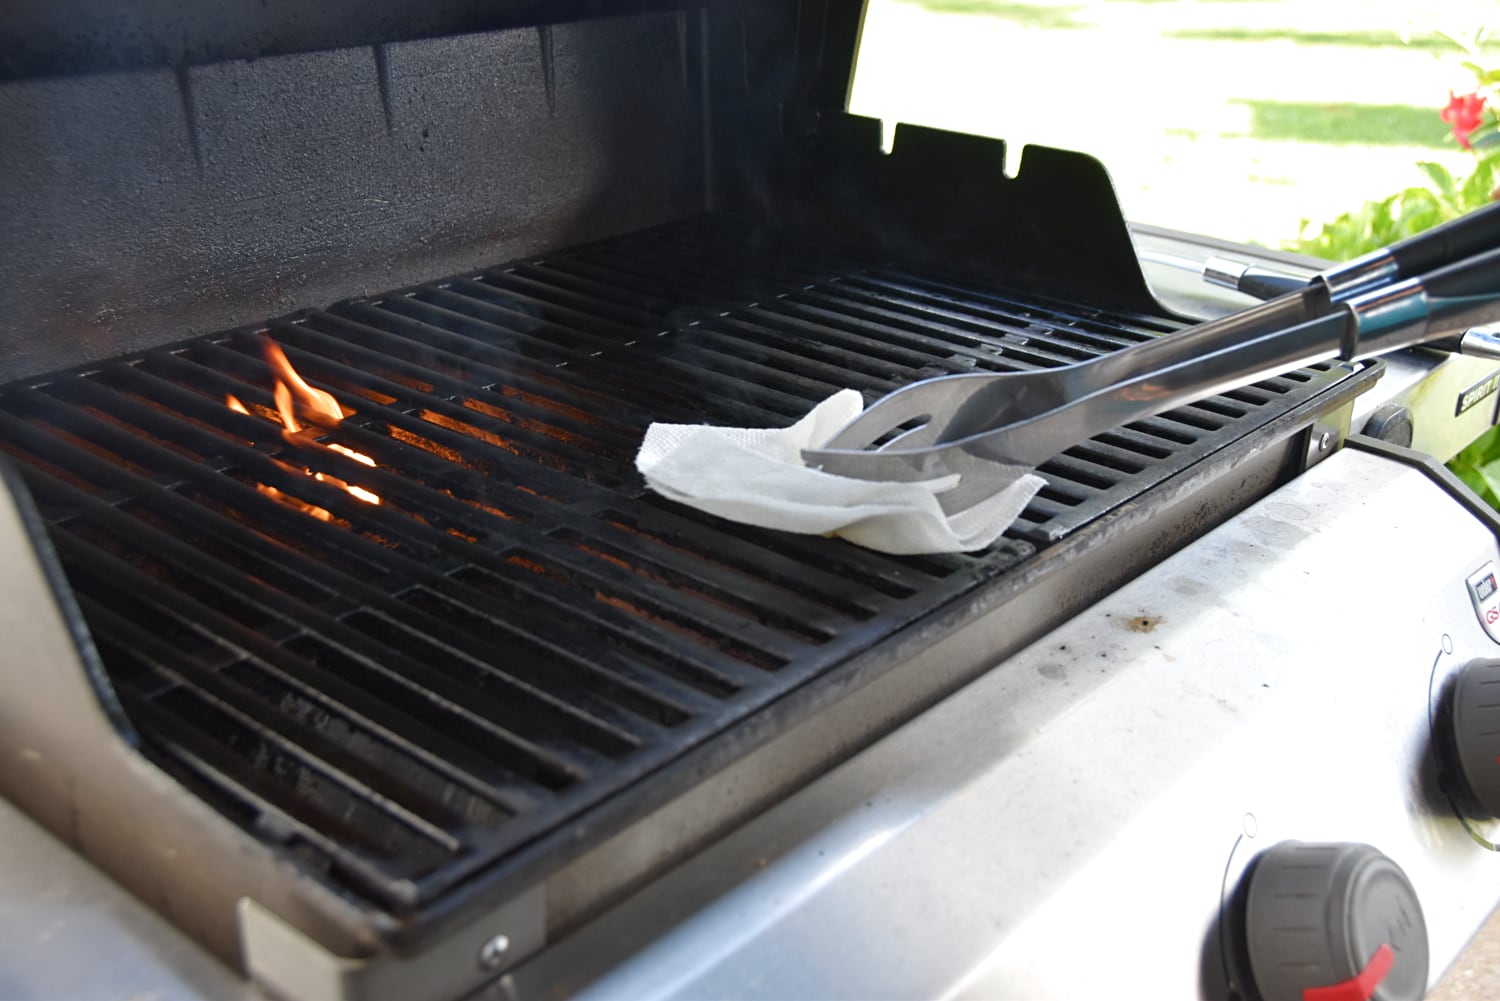 Oiling the grill grates with a well-oiled paper towel.